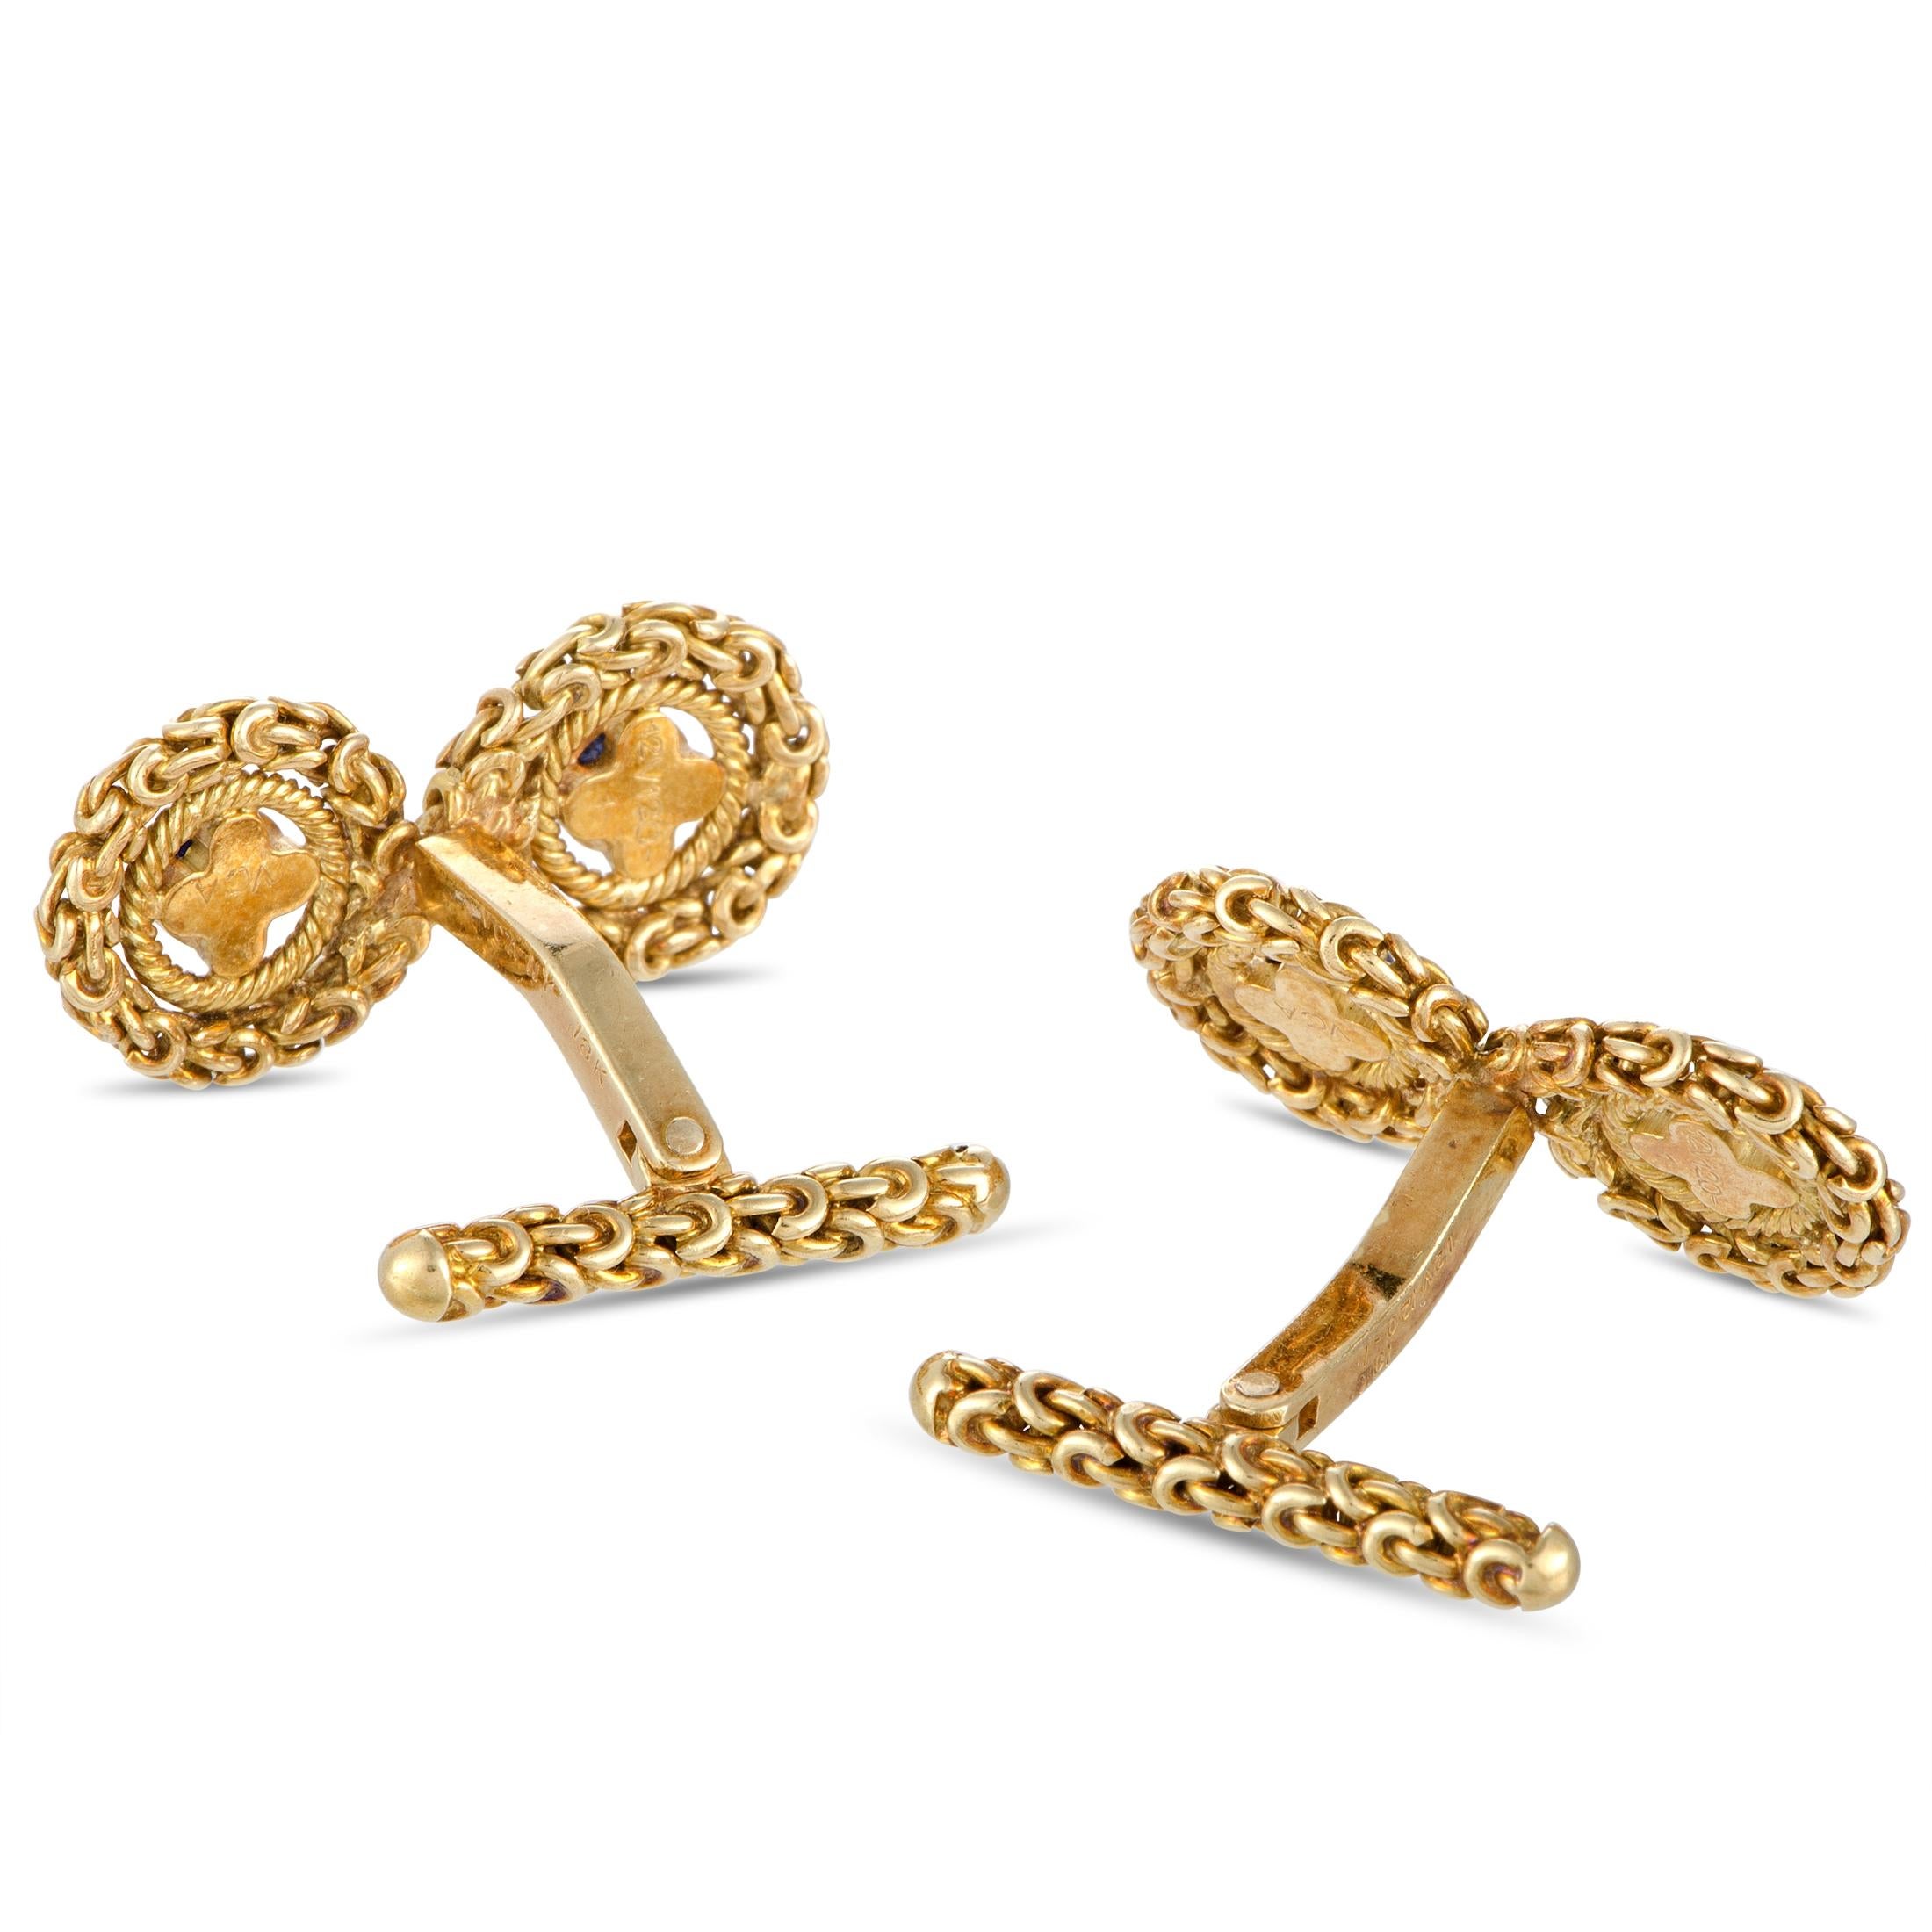 These vintage Van Cleef & Arpels cufflinks are made of 18K yellow gold and set with sapphires. The cufflinks measure 0.37” by 1.00” and each of the two weighs 6.15 grams for a total weight of 12.3 grams.

This pair of cufflinks is offered in estate